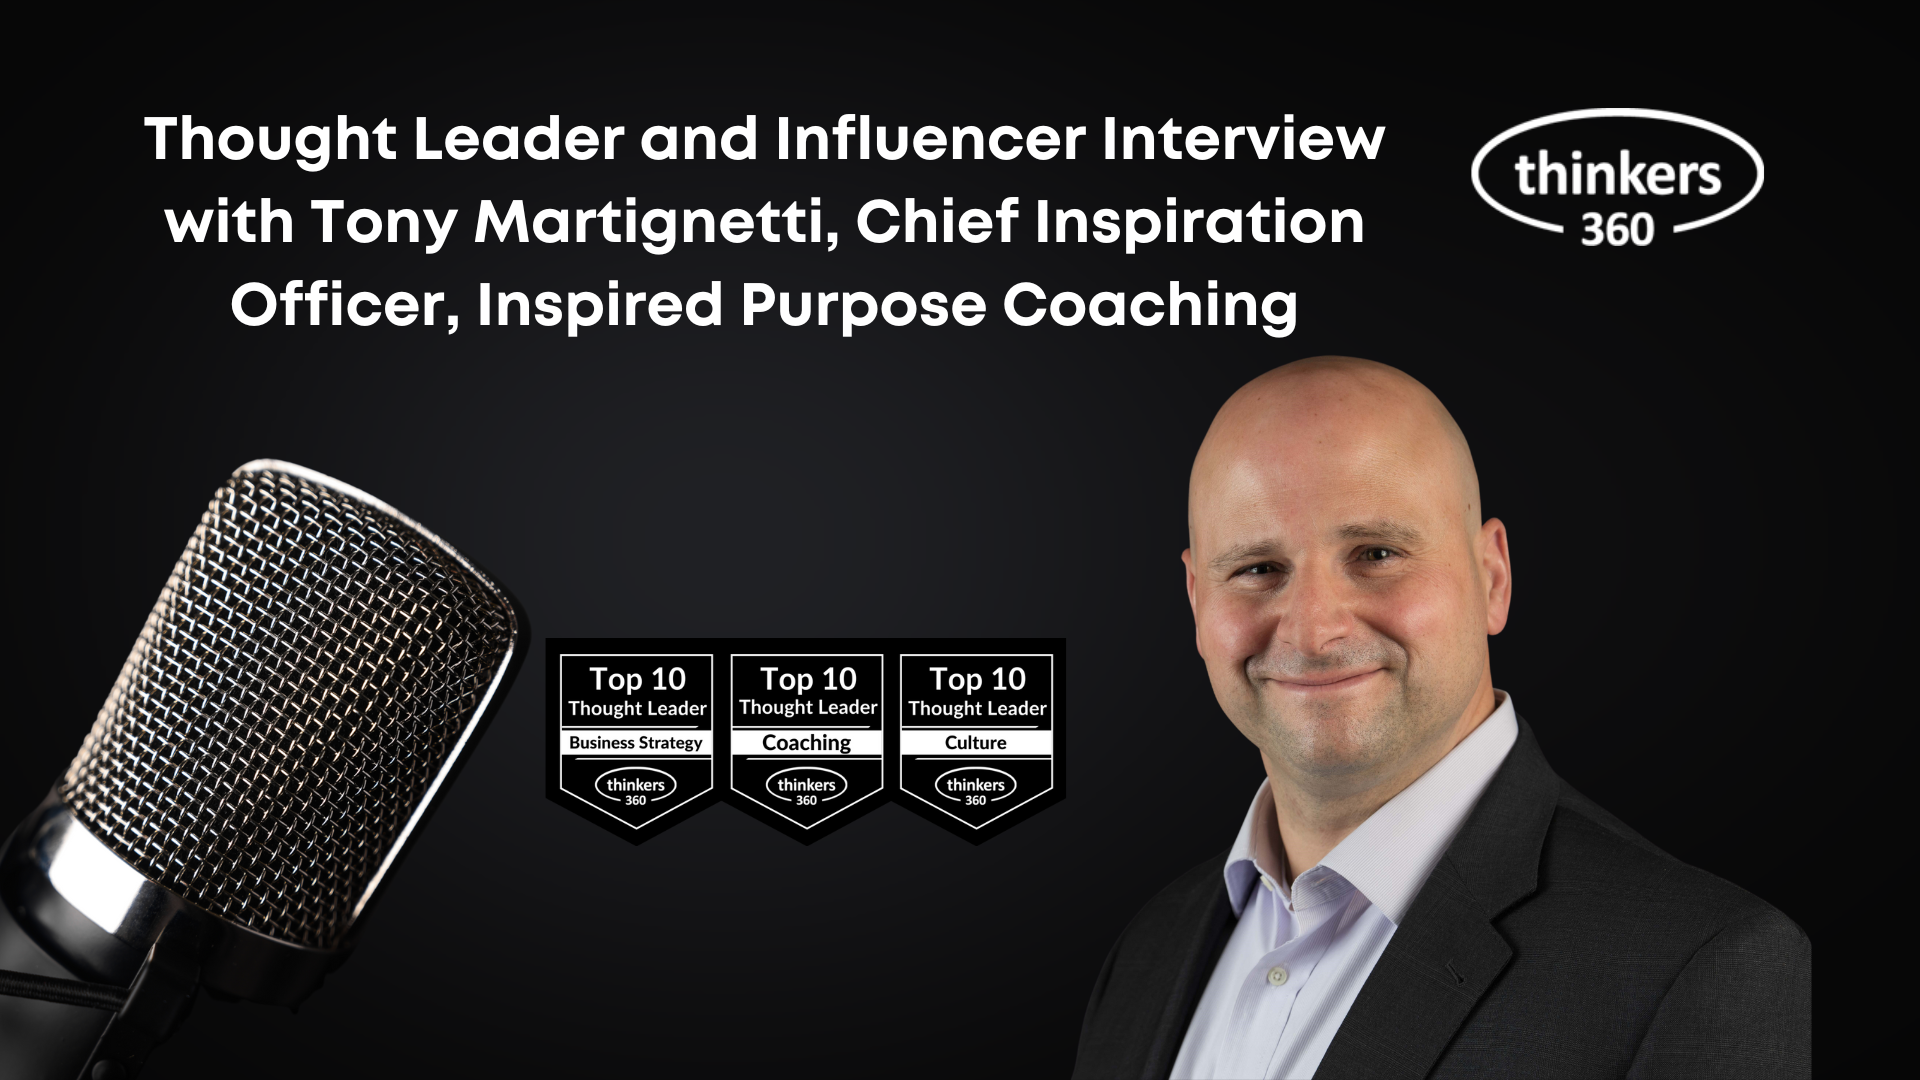 Thought Leader and Influencer Interview images (1) | Thinkers360